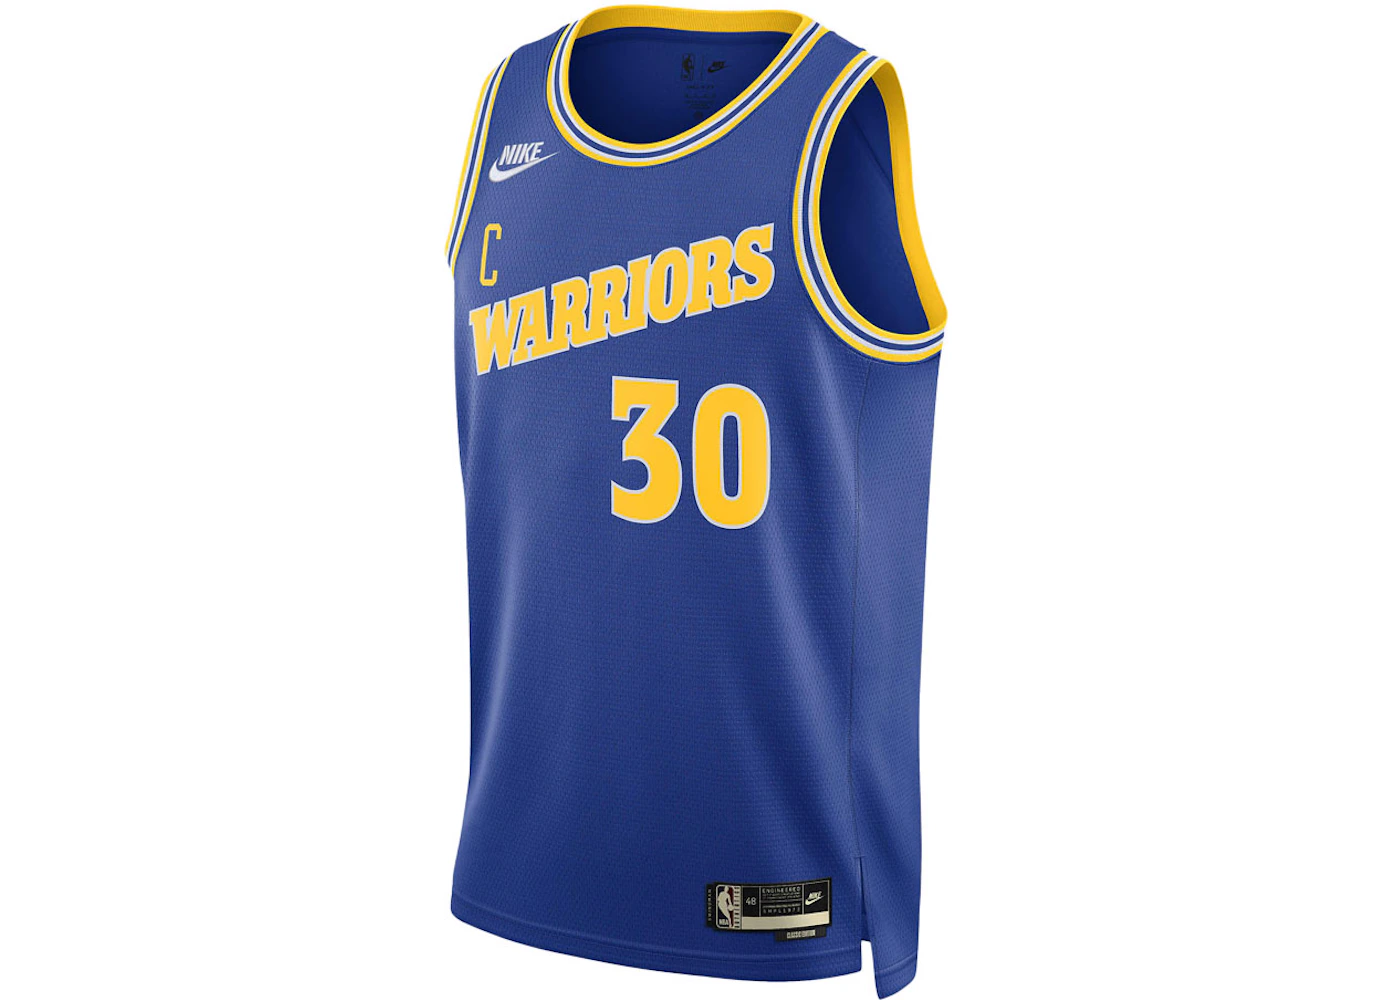 real steph curry jersey